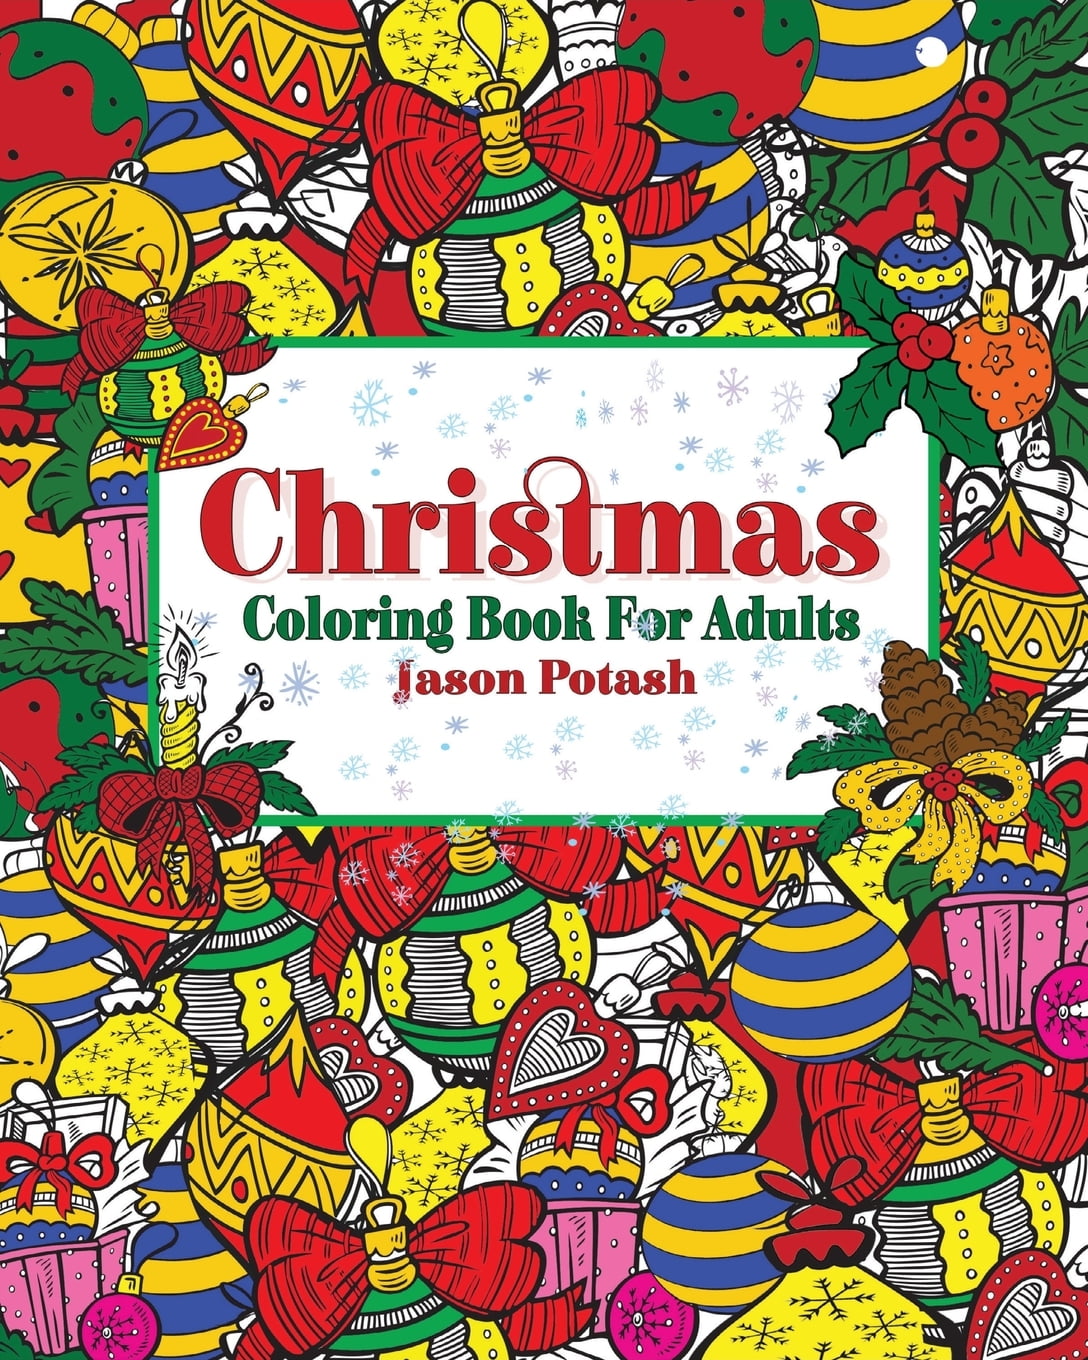 Download Christmas Coloring Book for Adults - Walmart.com